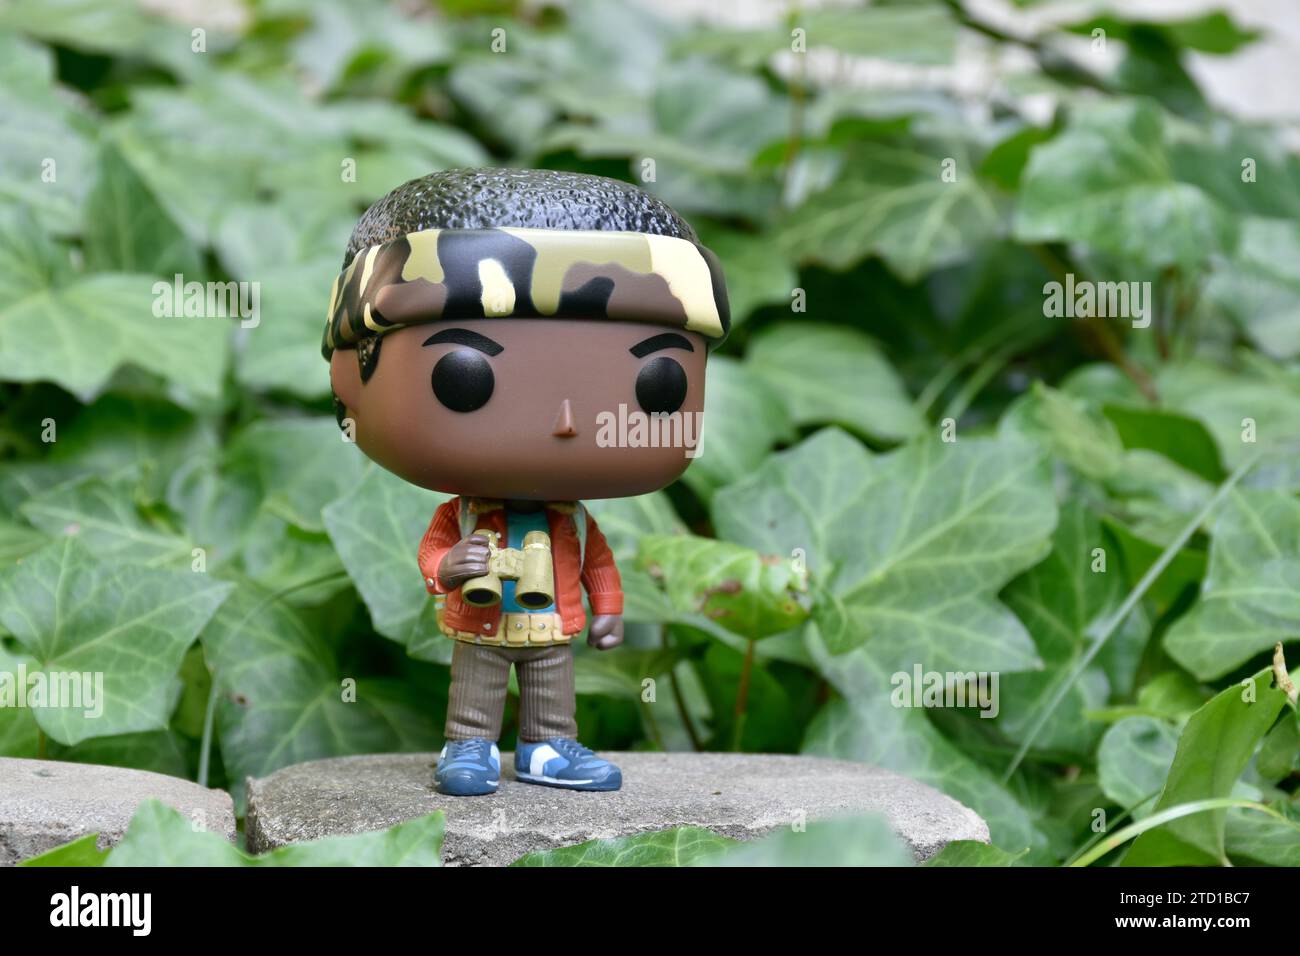 Funko Pop action figure of Lucas Sinclair with binoculars from Netflix TV series Stranger Things. Green ivy plant leaves, abandoned garden, spying. Stock Photo